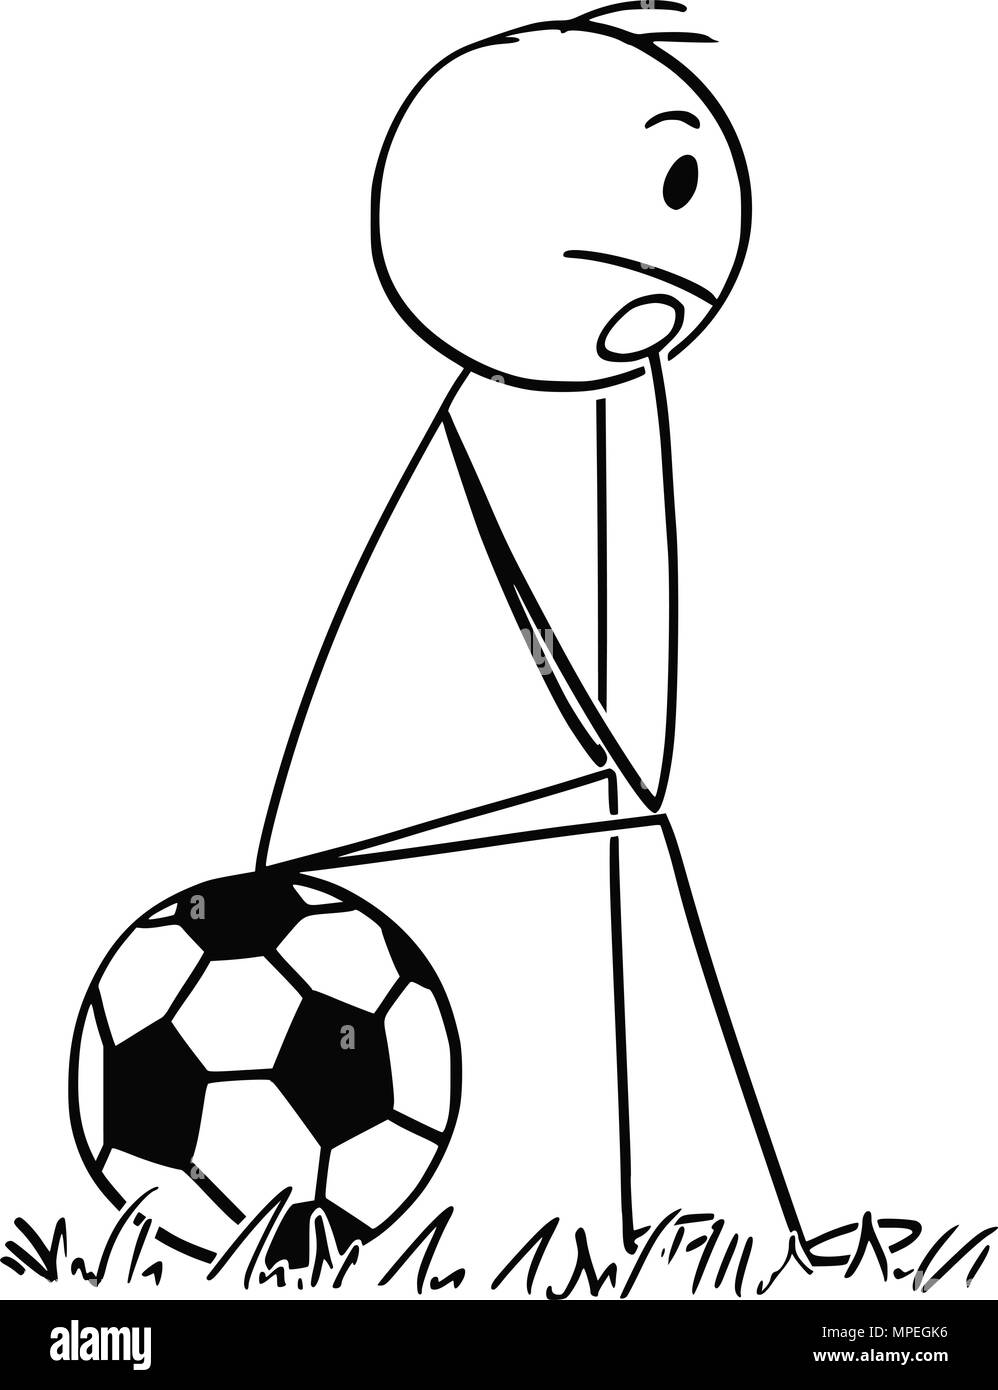 Cartoon of Sad or Depressed Football or Soccer Player Sitting on Ball Stock Vector